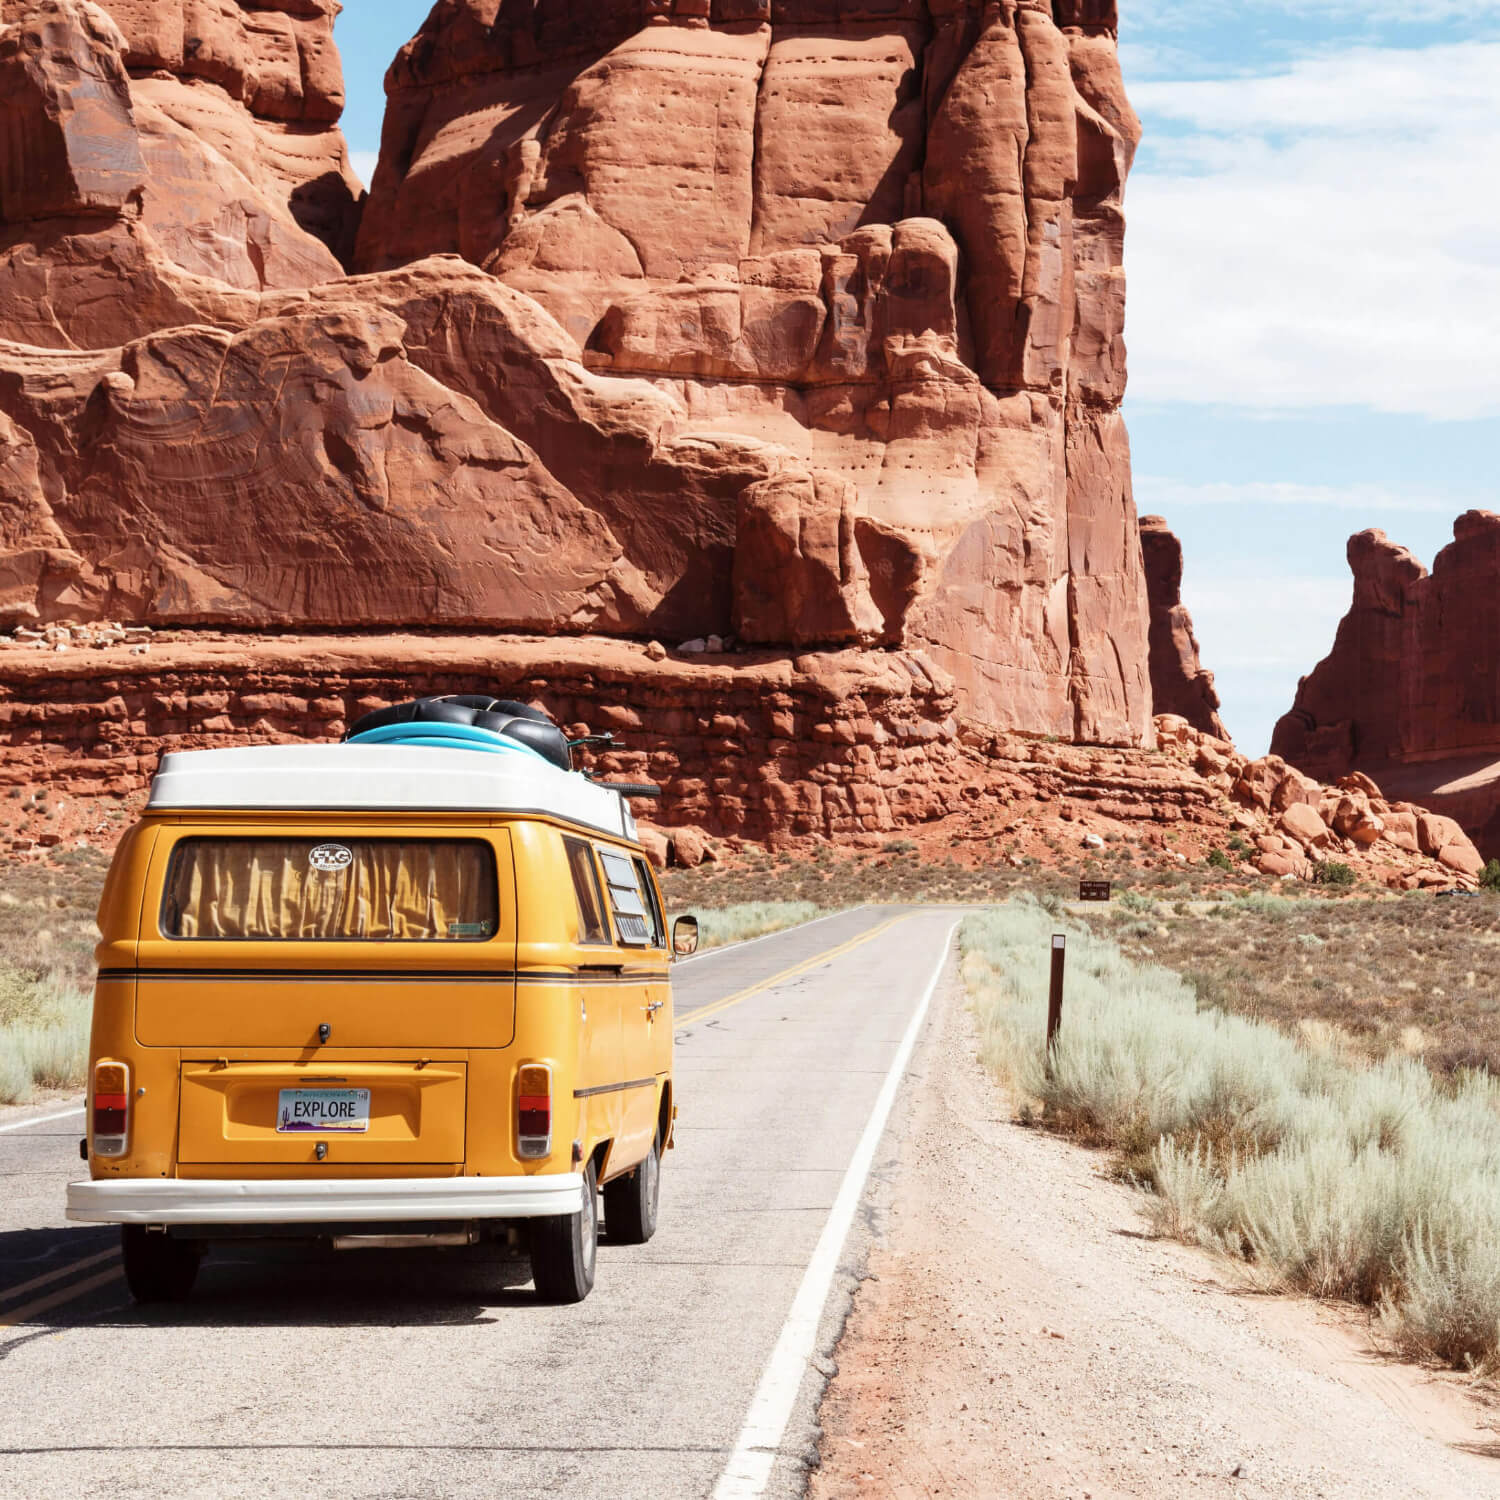 A yellow vintage van travels down an open road through a desert landscape with large red rock formations in the background. The van, embodying the spirit of summer adventure, has surfboards strapped to the roof and a blue sky with scattered clouds above. The license plate reads "EXPLORE.